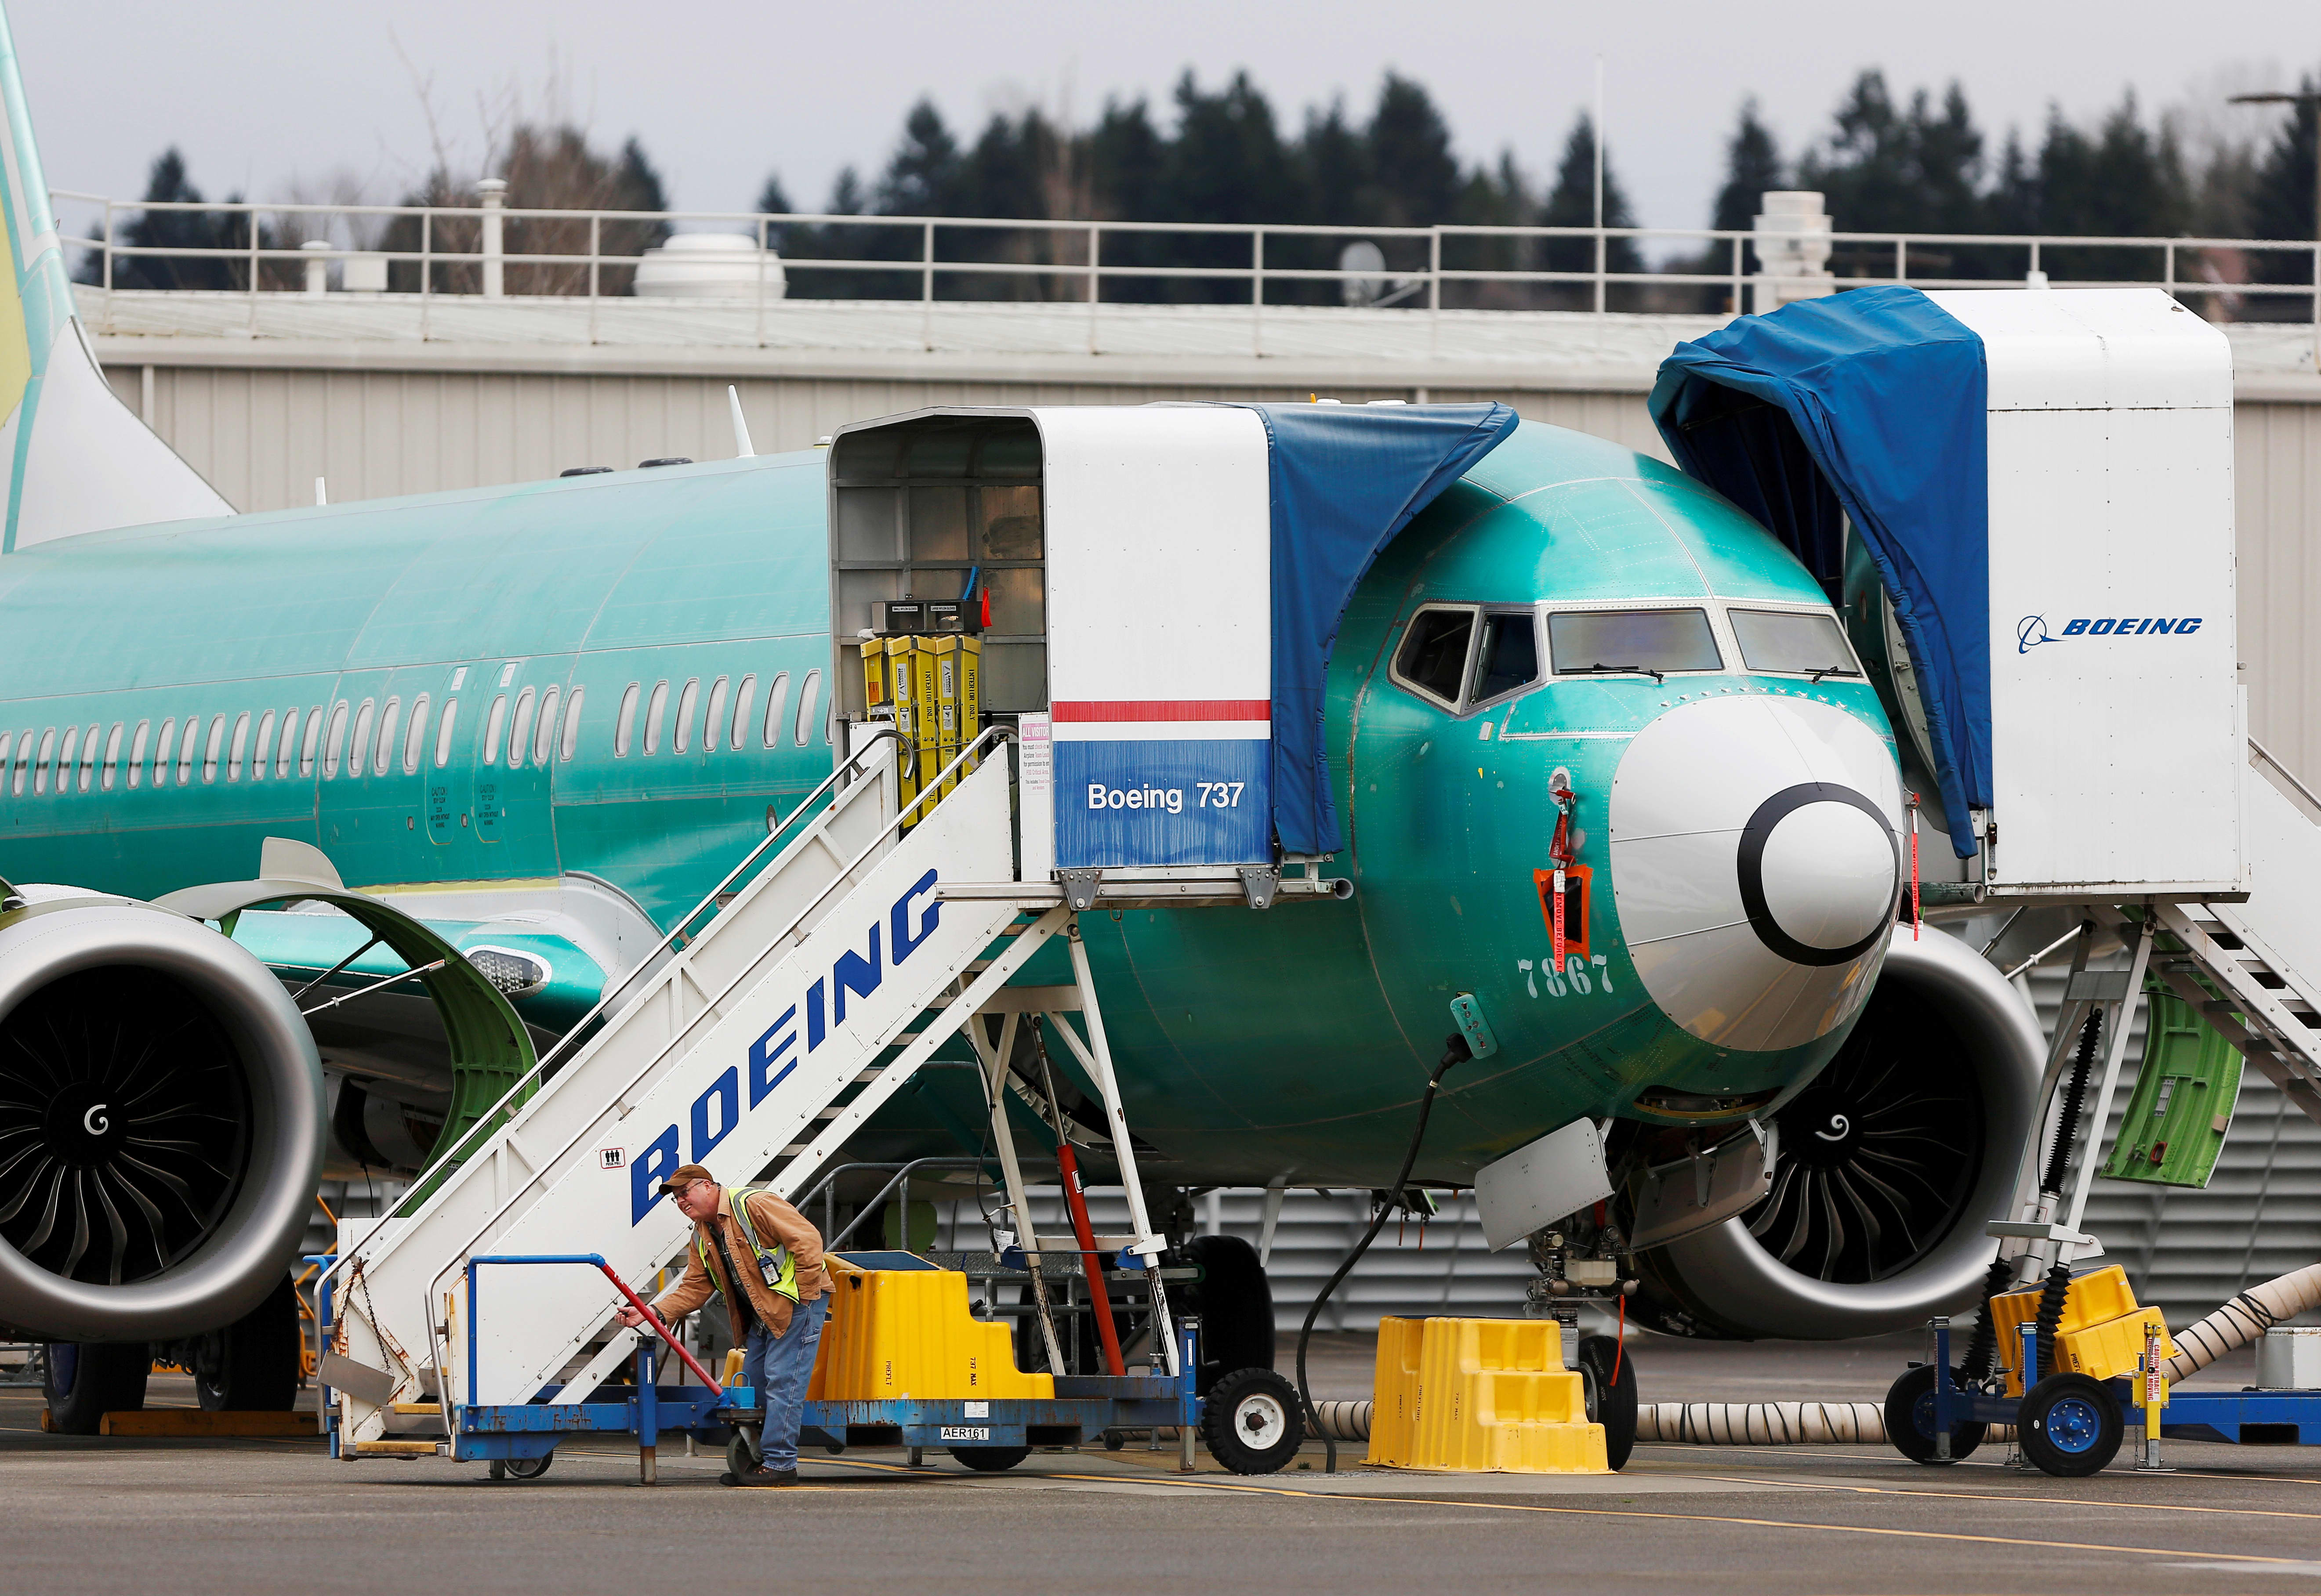 Boeing to pay more than $2.5 billion to settle criminal conspiracy charge over 737 Max